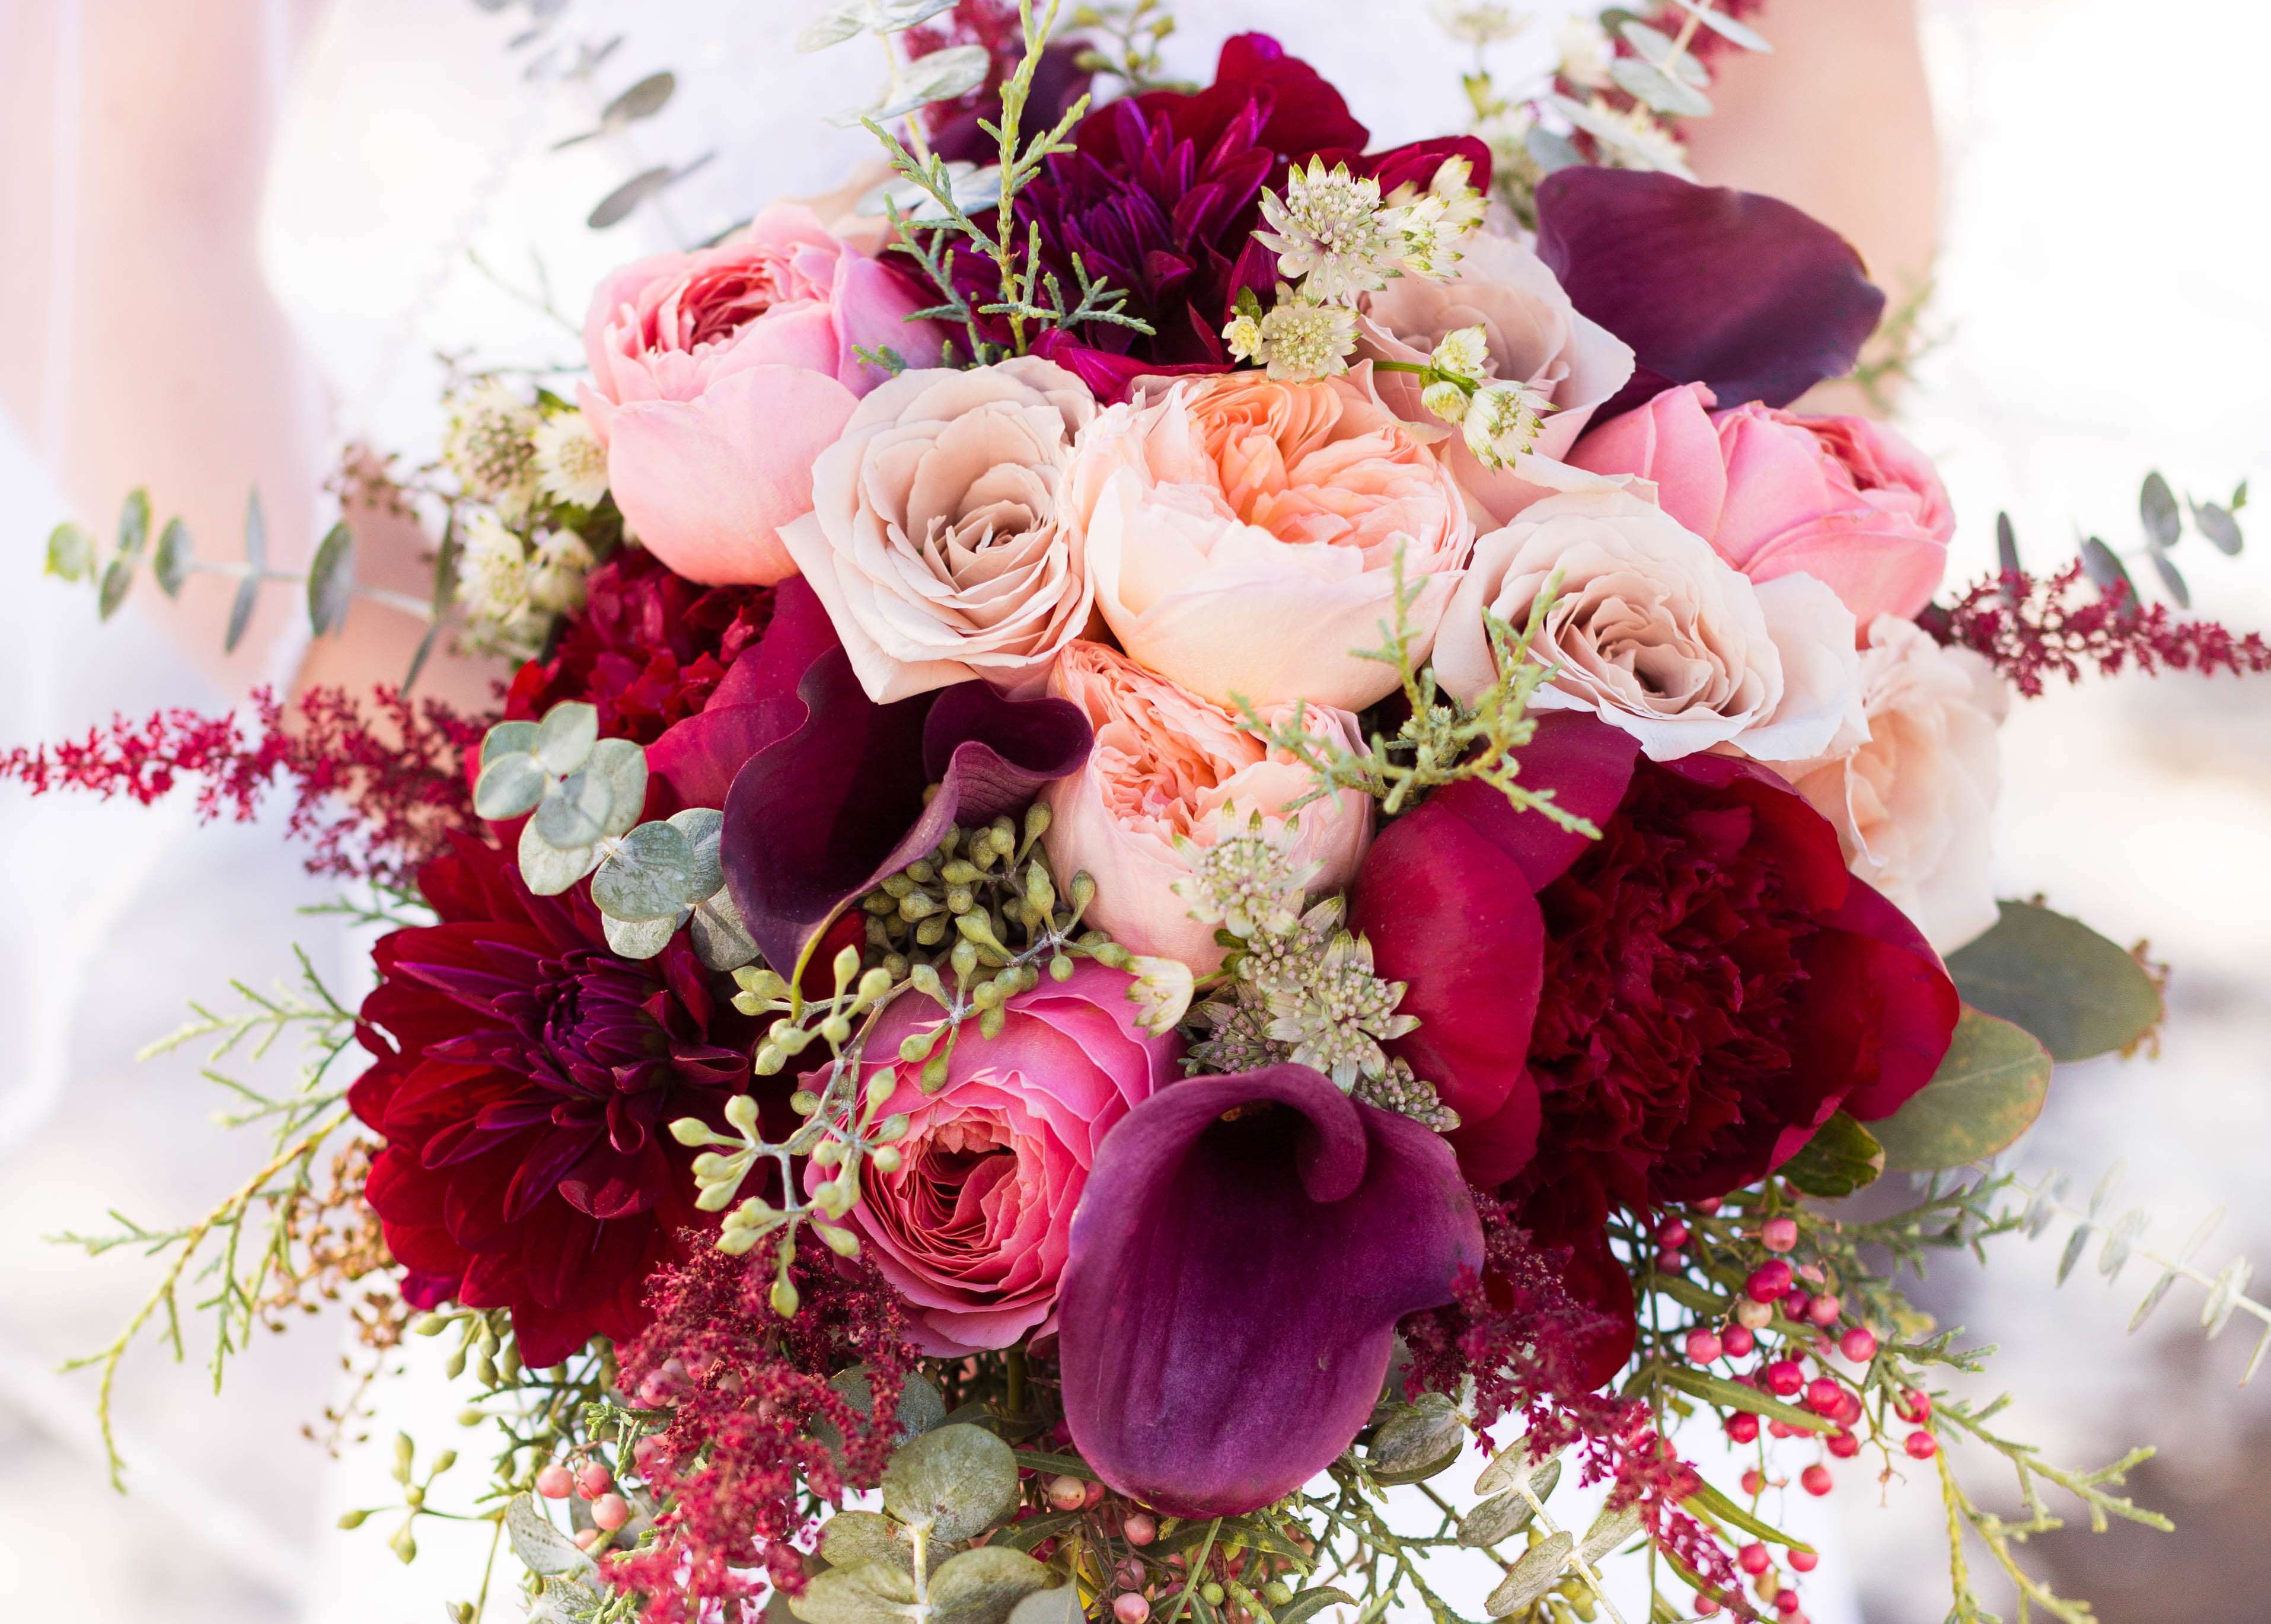 bouquet of pink and burgundy garden roses, dahlias, and calla lillies from Vintage Magnolia Florist